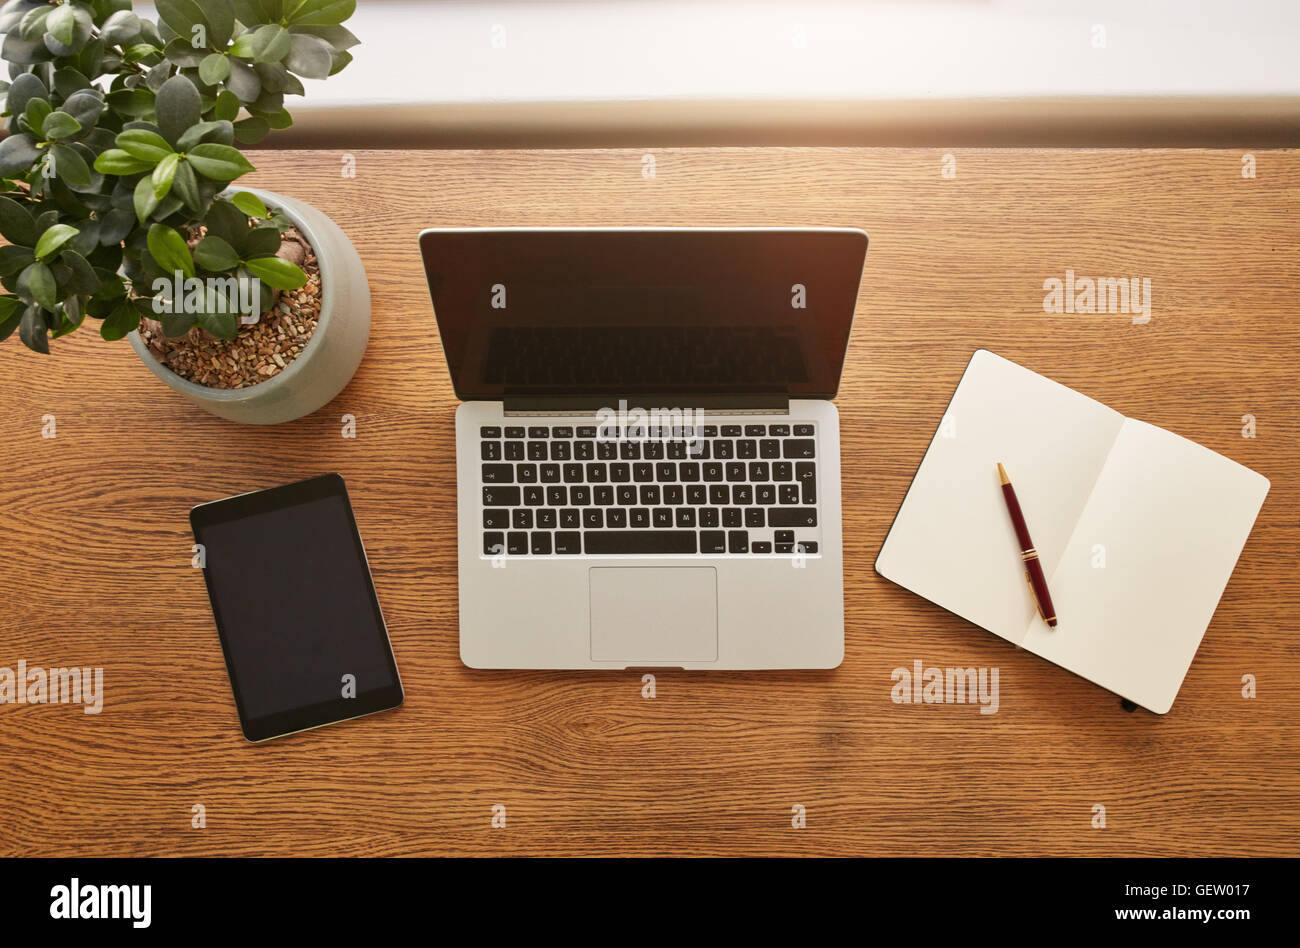 Top view shot of laptop computer, digital tablet, potted plant, diary and pen on wooden worktable. Stock Photo